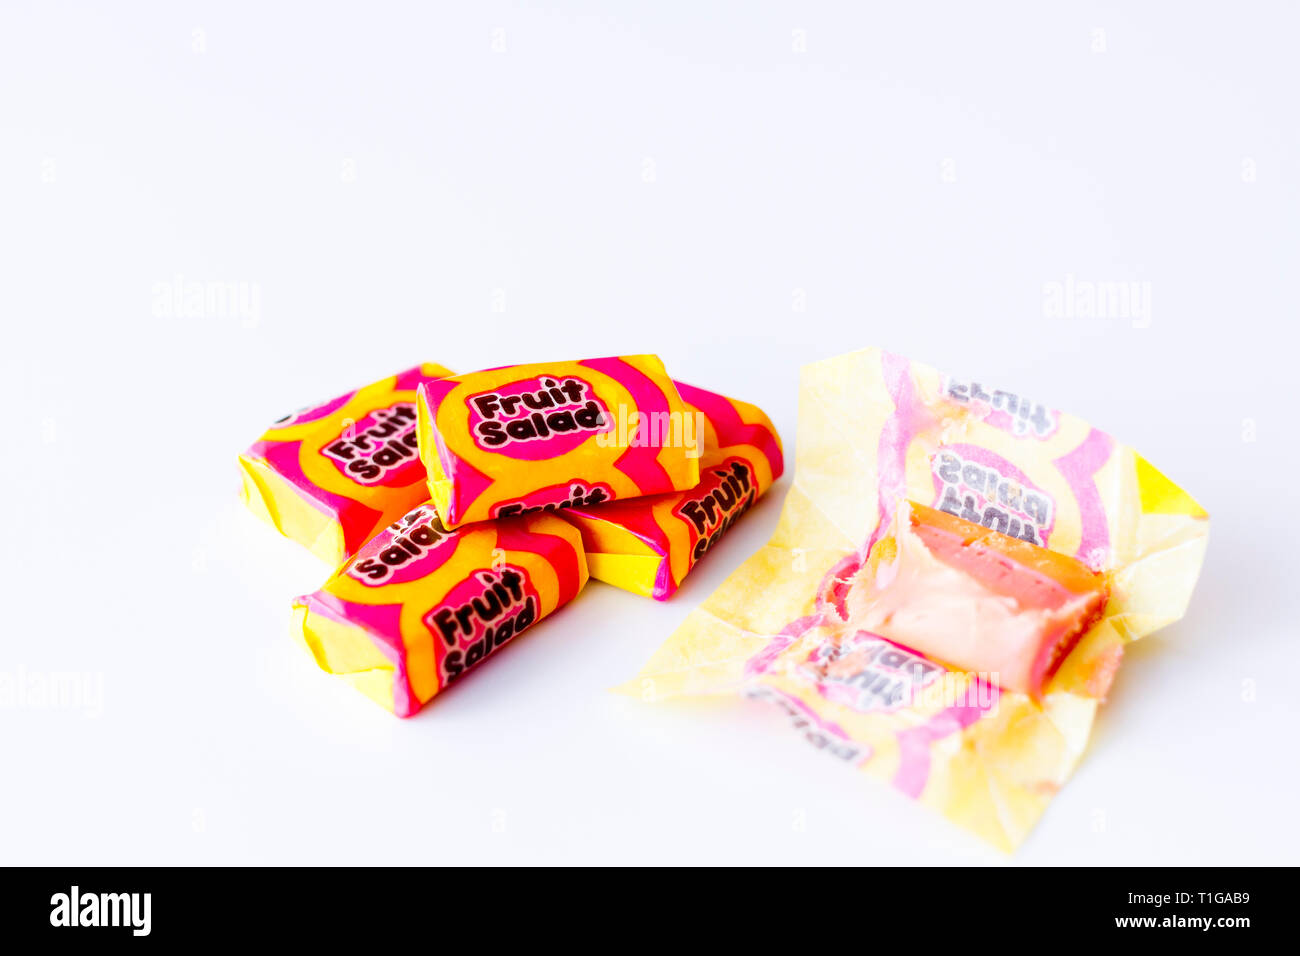 Some Fruit Salad sweets. Chewy sweets. Sweet chews. Candy. United Kingdom Stock Photo